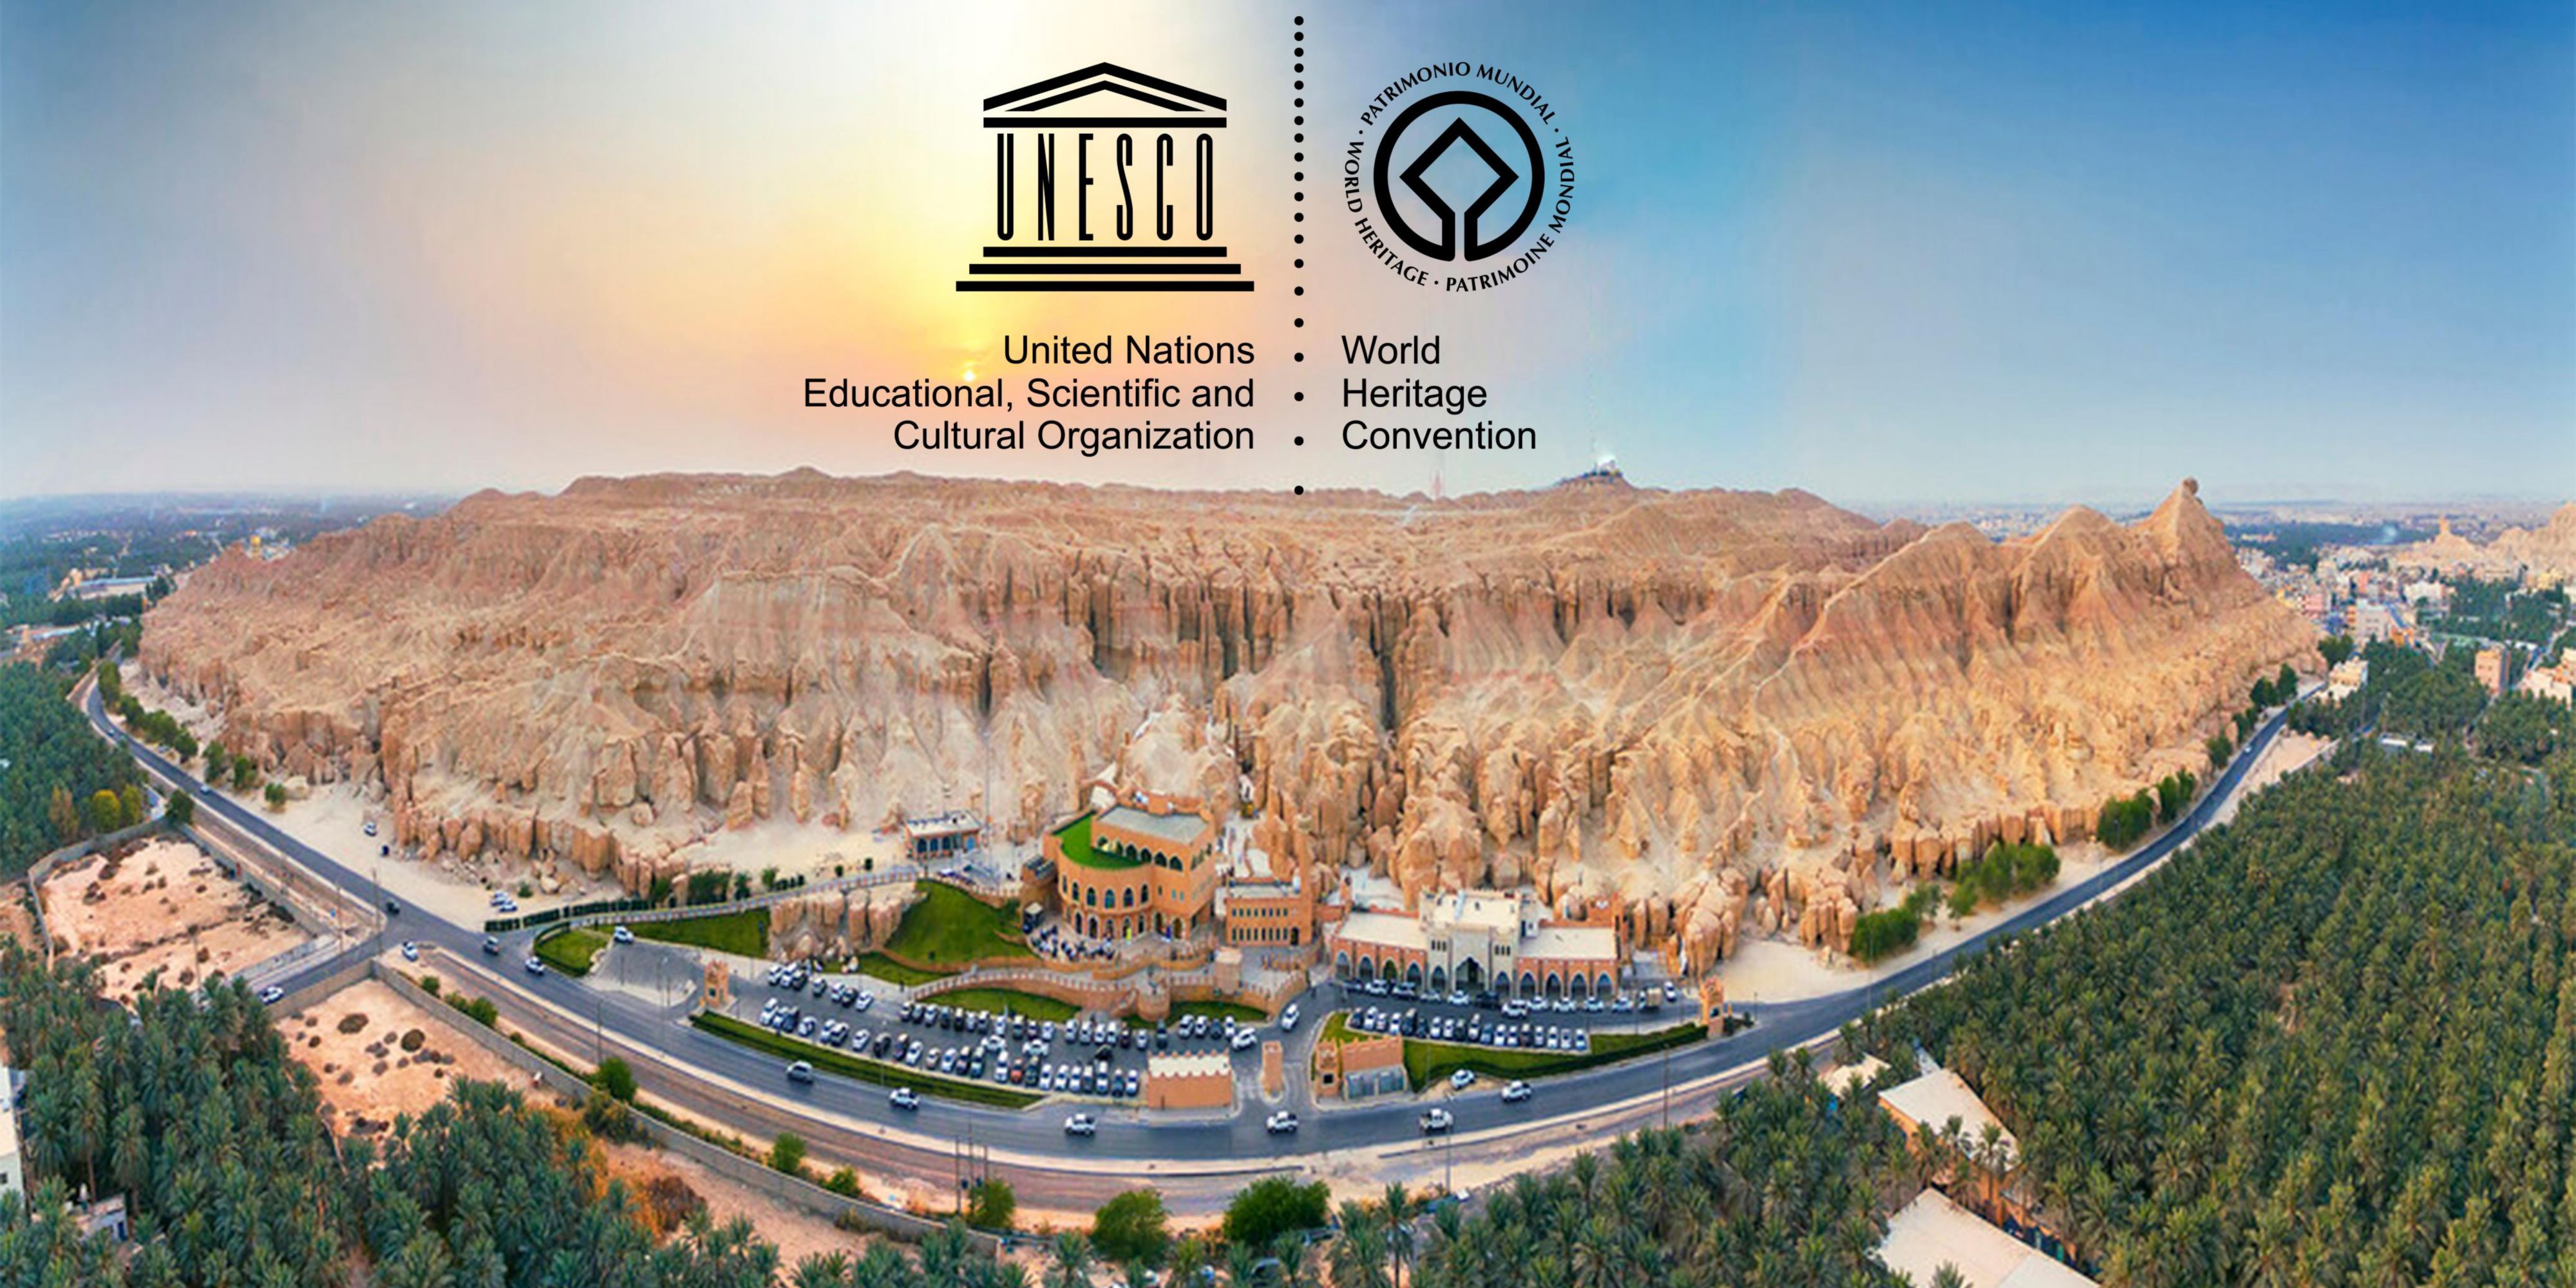 Explore al Ahsa, a UNESCO World Heritage Site and a destination of spectacular landscapes of gardens, canal springs, wells and drainage lakes. With historical wonders close to the hotel and plenty of sightseeing activities, enjoy the convenience of our designed package tours and city excursions.